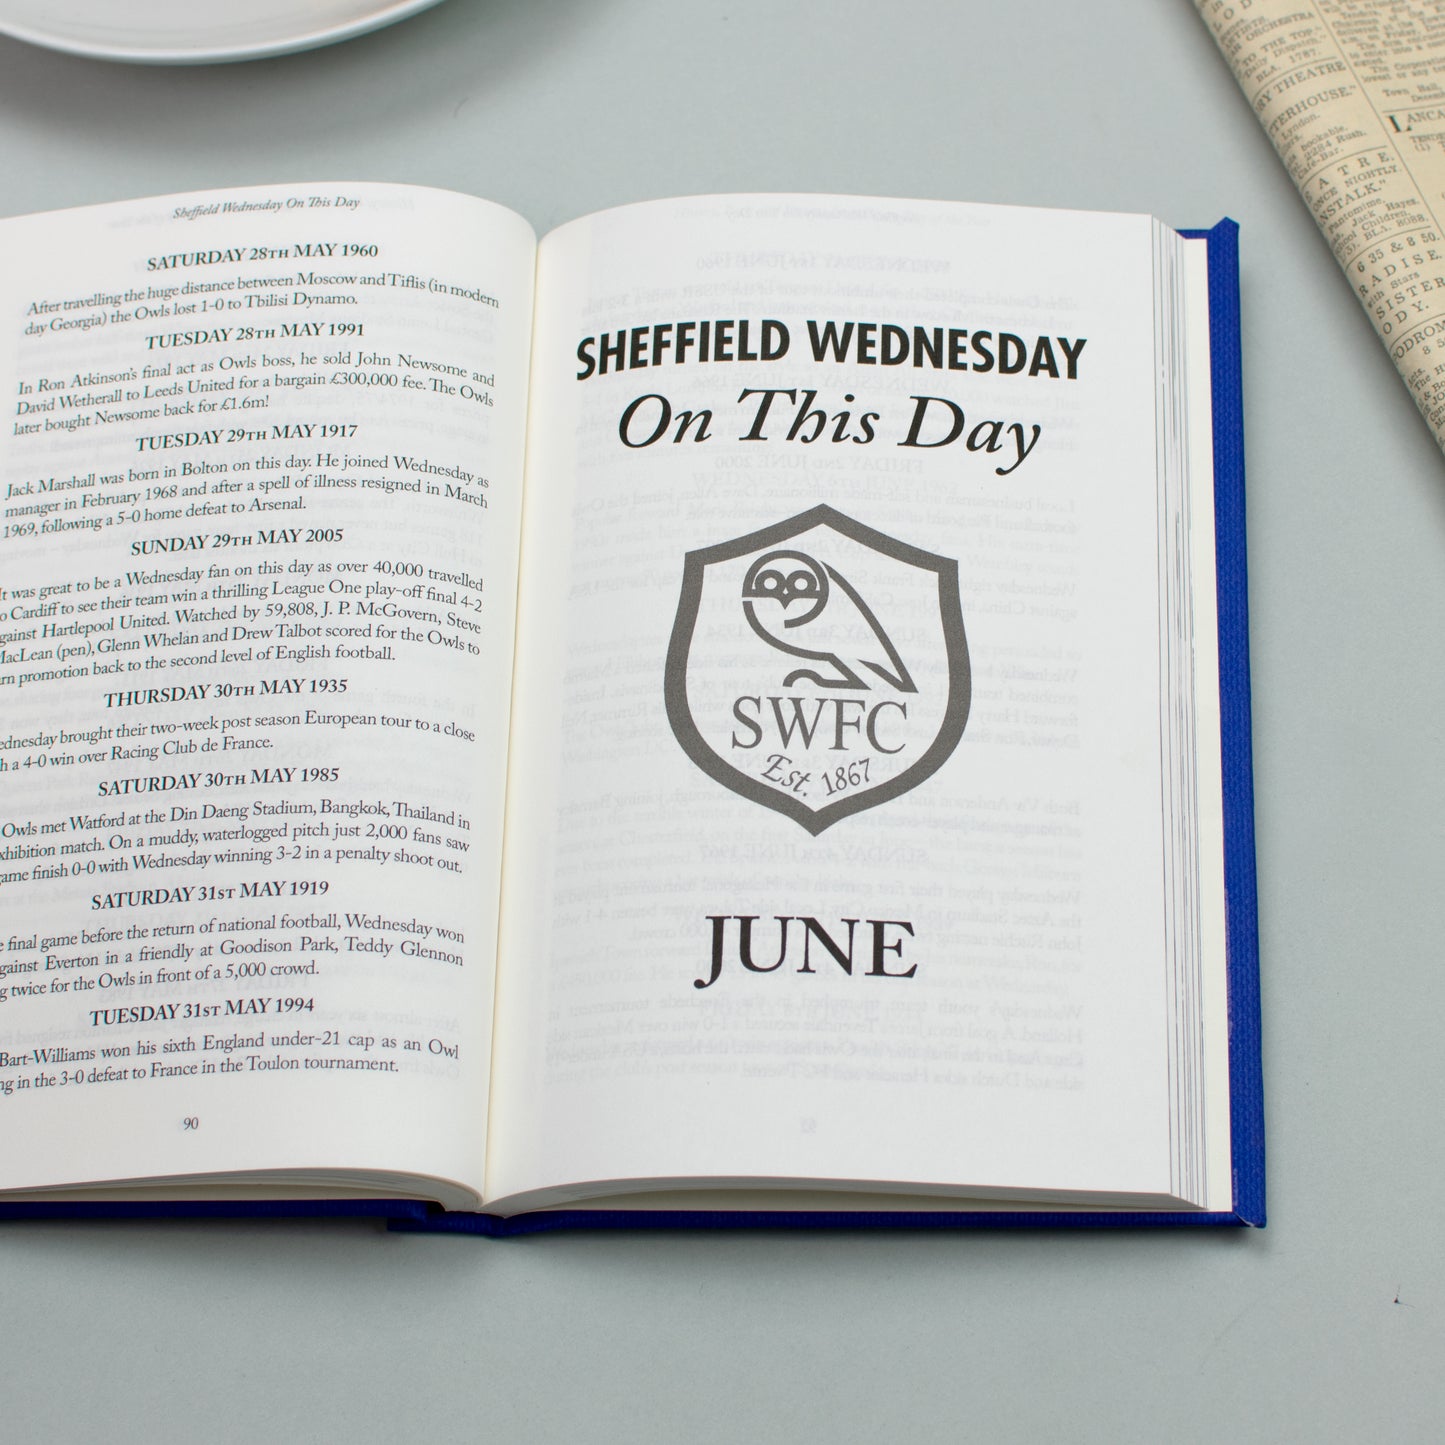 Personalised Sheffield Wednesday On This Day Book